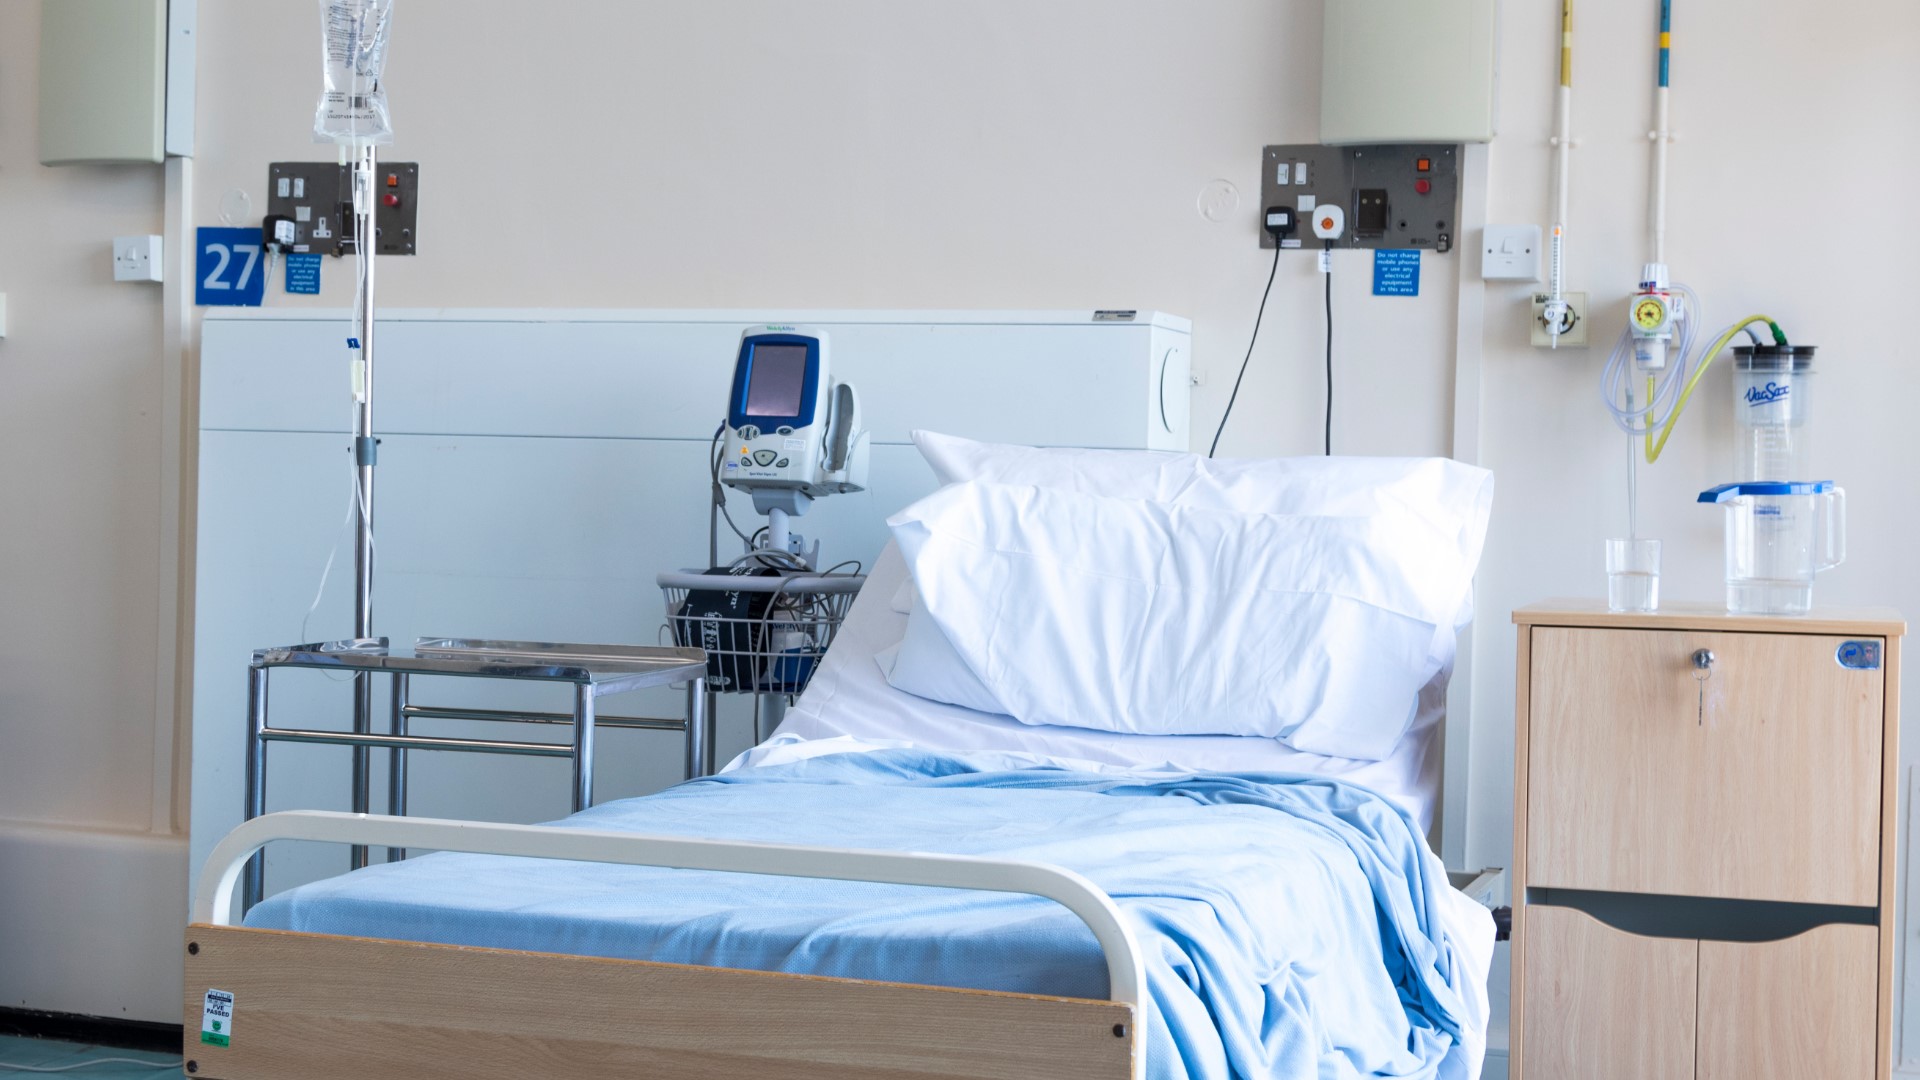 As Pinellas County hospitals drop to less than 15% of available ICU beds for the entire county, leaders are also concerned about staff shortages.